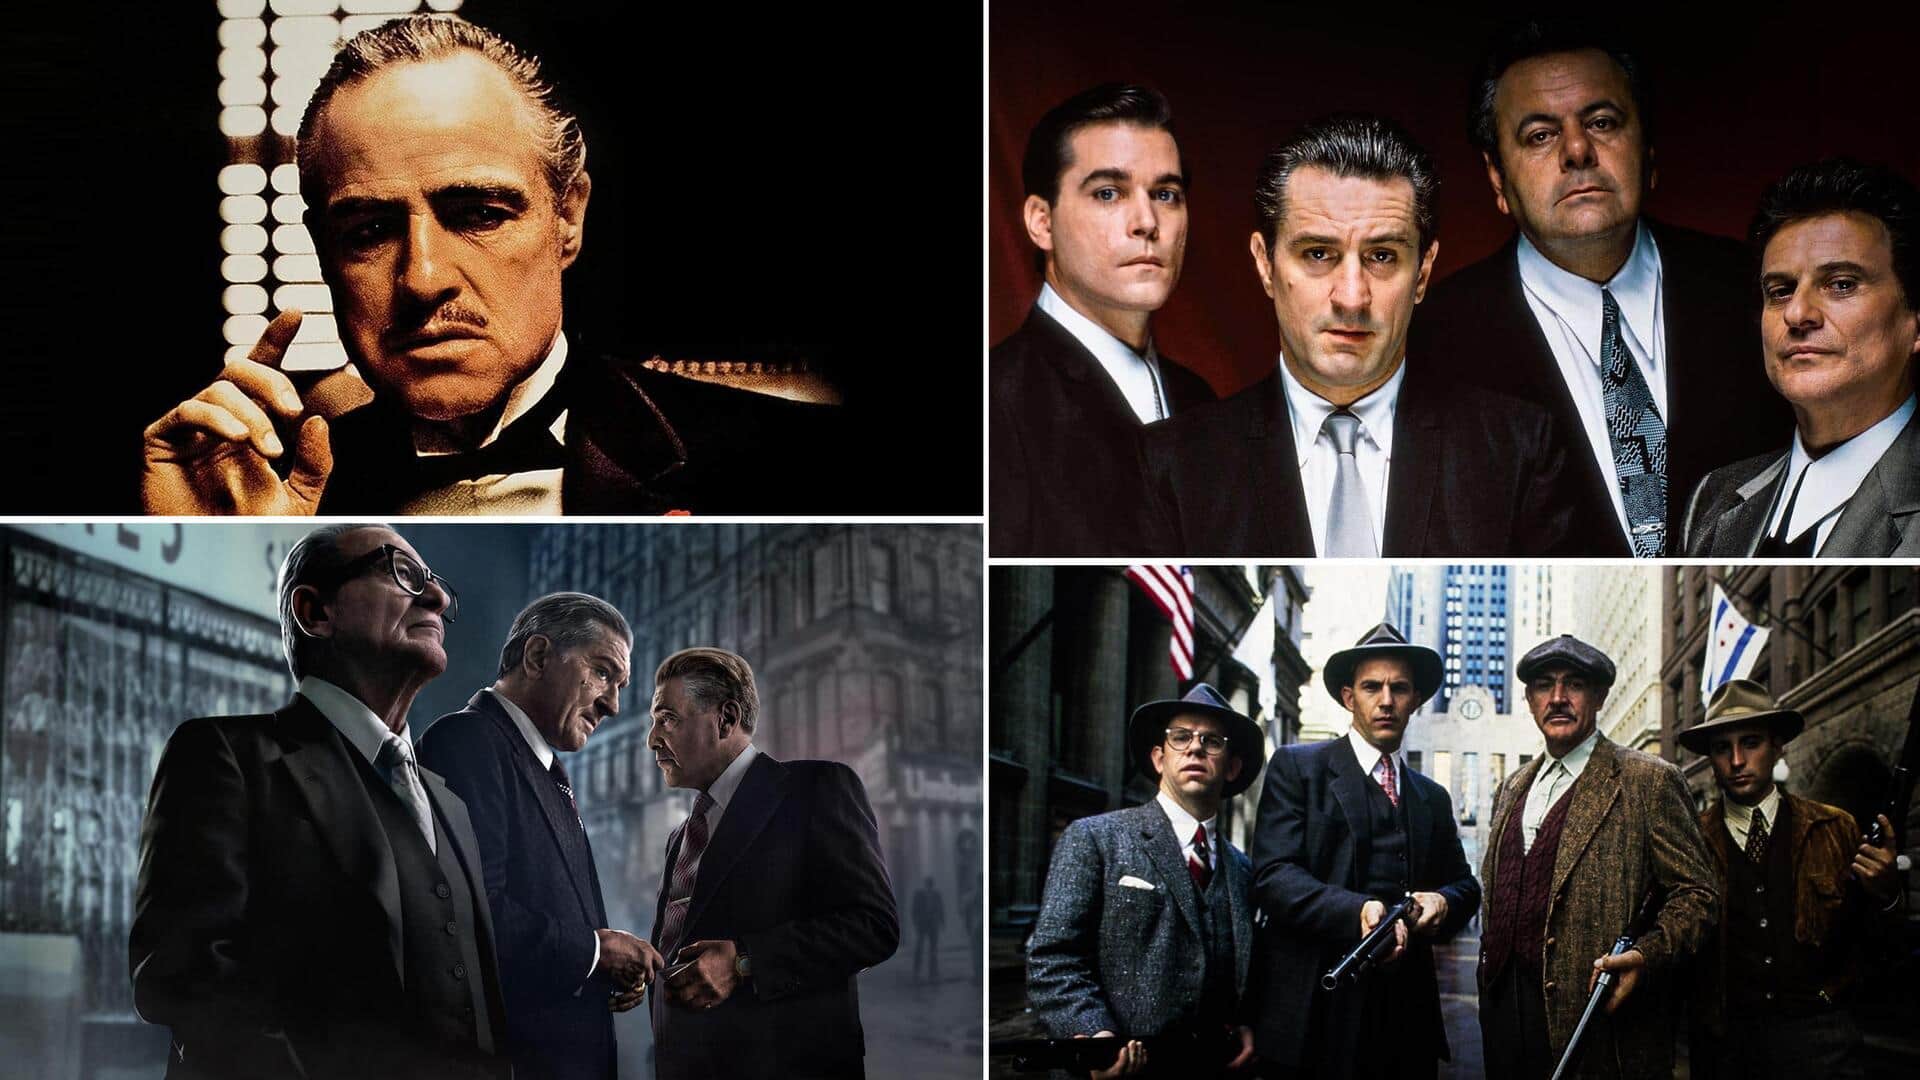 'The Godfather' to 'The Untouchables': 5 top Hollywood mafia movies